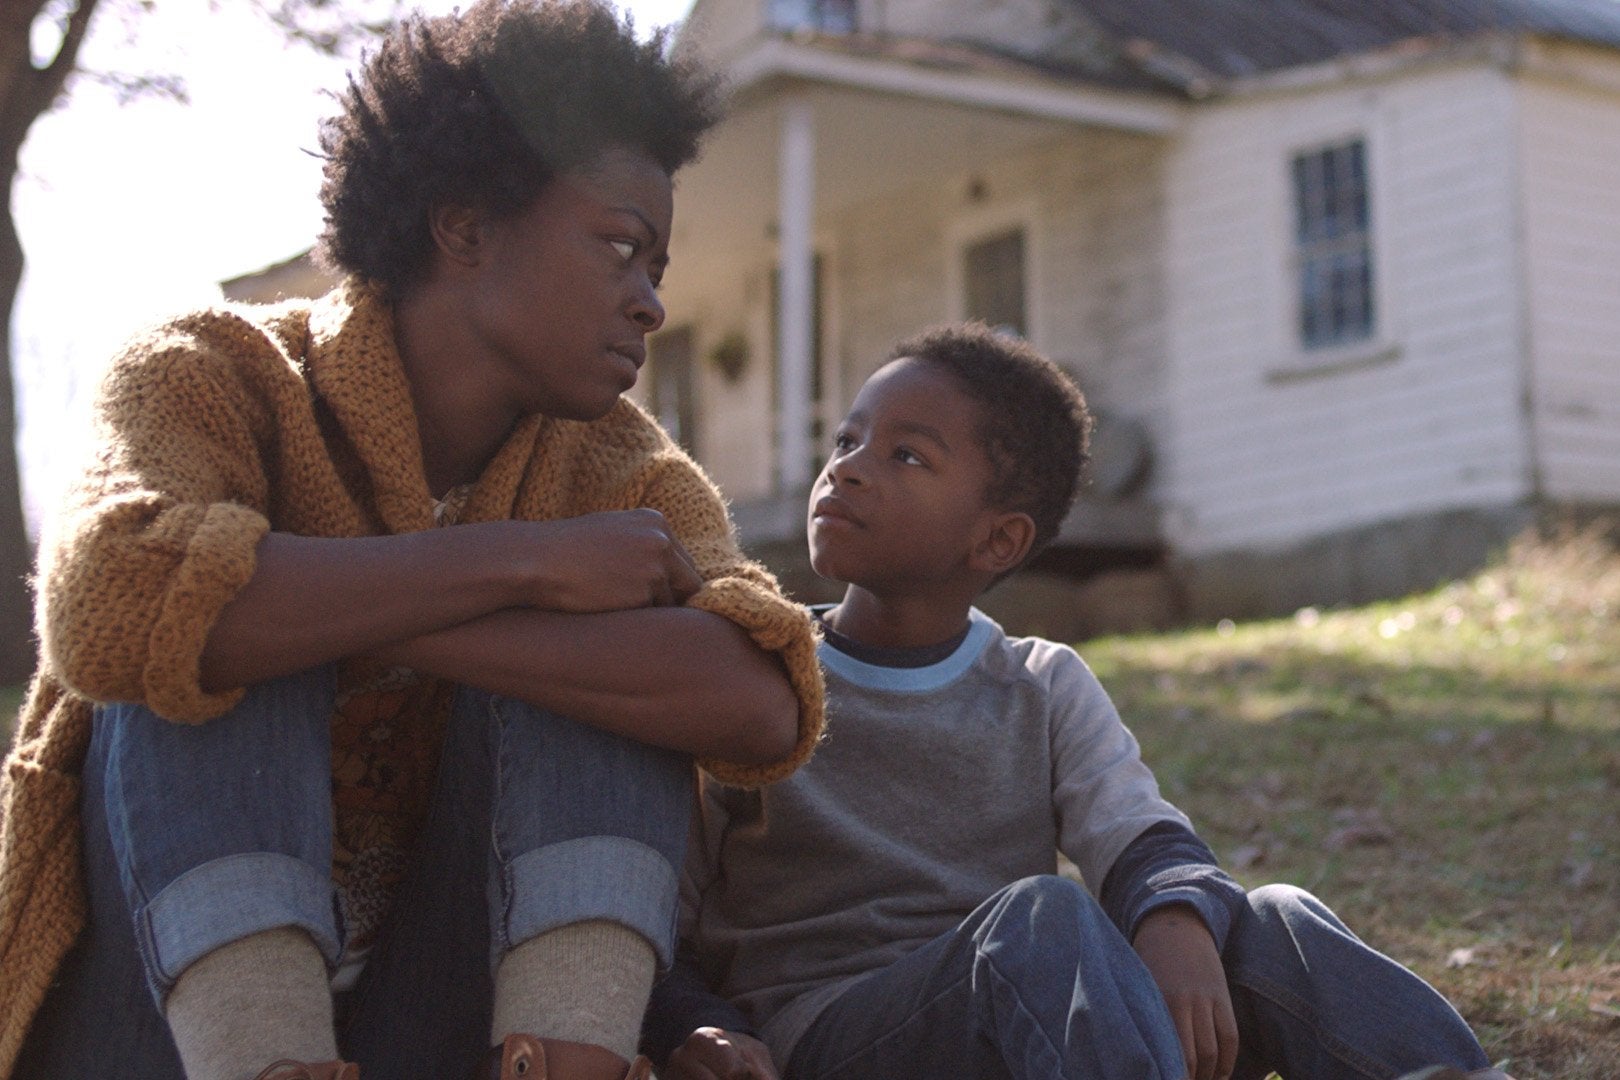 A black woman sits on a lawn with a young black boy in front of a slightly worn down house.